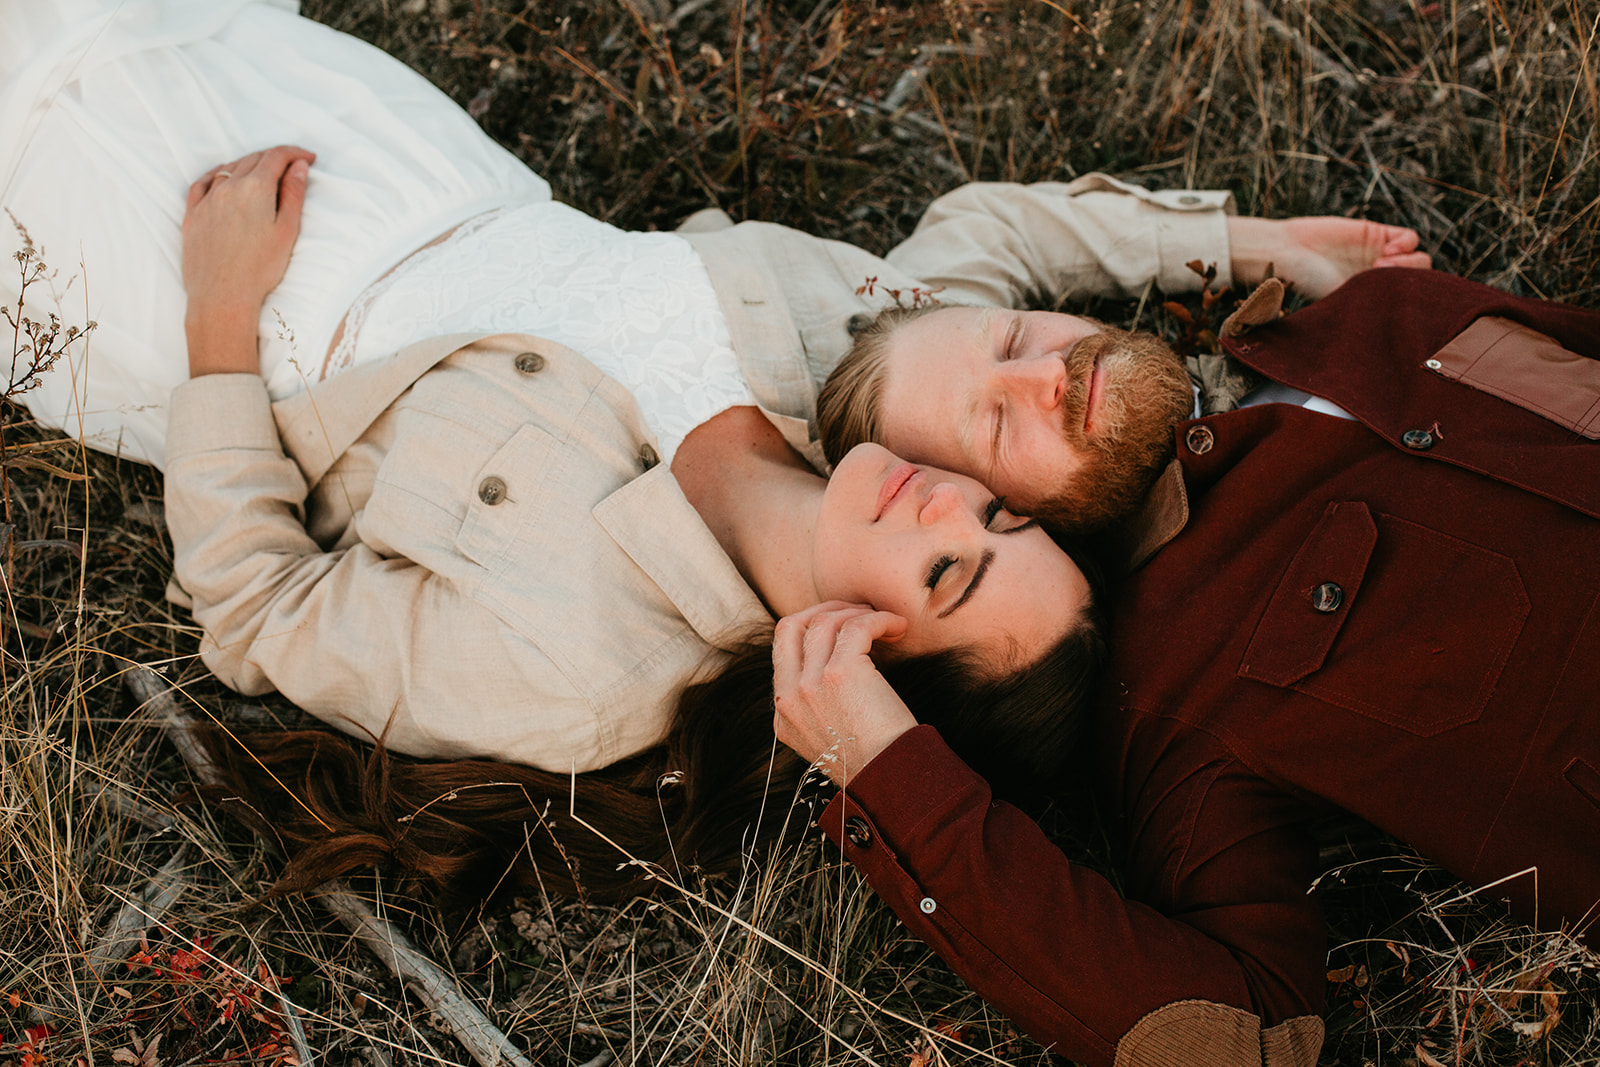 Autumnal Elopement Inspiration in the Kootenays - Wedding and Elopement Inspiration in BC on Bronte Bride